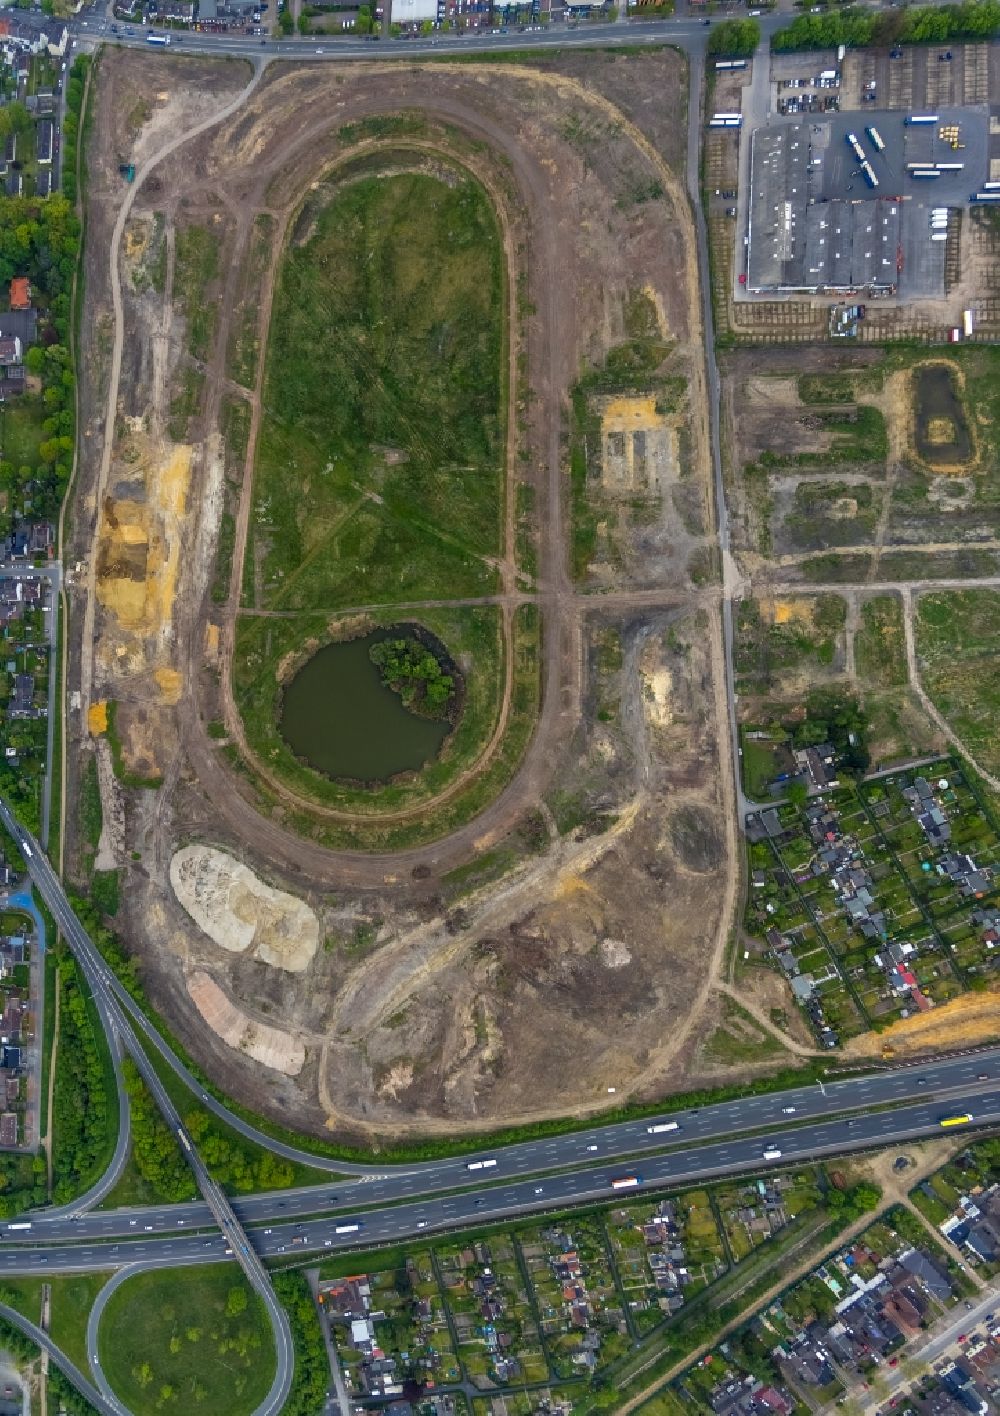 Aerial photograph Recklinghausen - Development, demolition and renovation work on the site of the former racing track - harness racing track as part of the integrated district development concept (ISEK) Hillerheide in Recklinghausen at Ruhrgebiet in the state of North Rhine-Westphalia, Germany